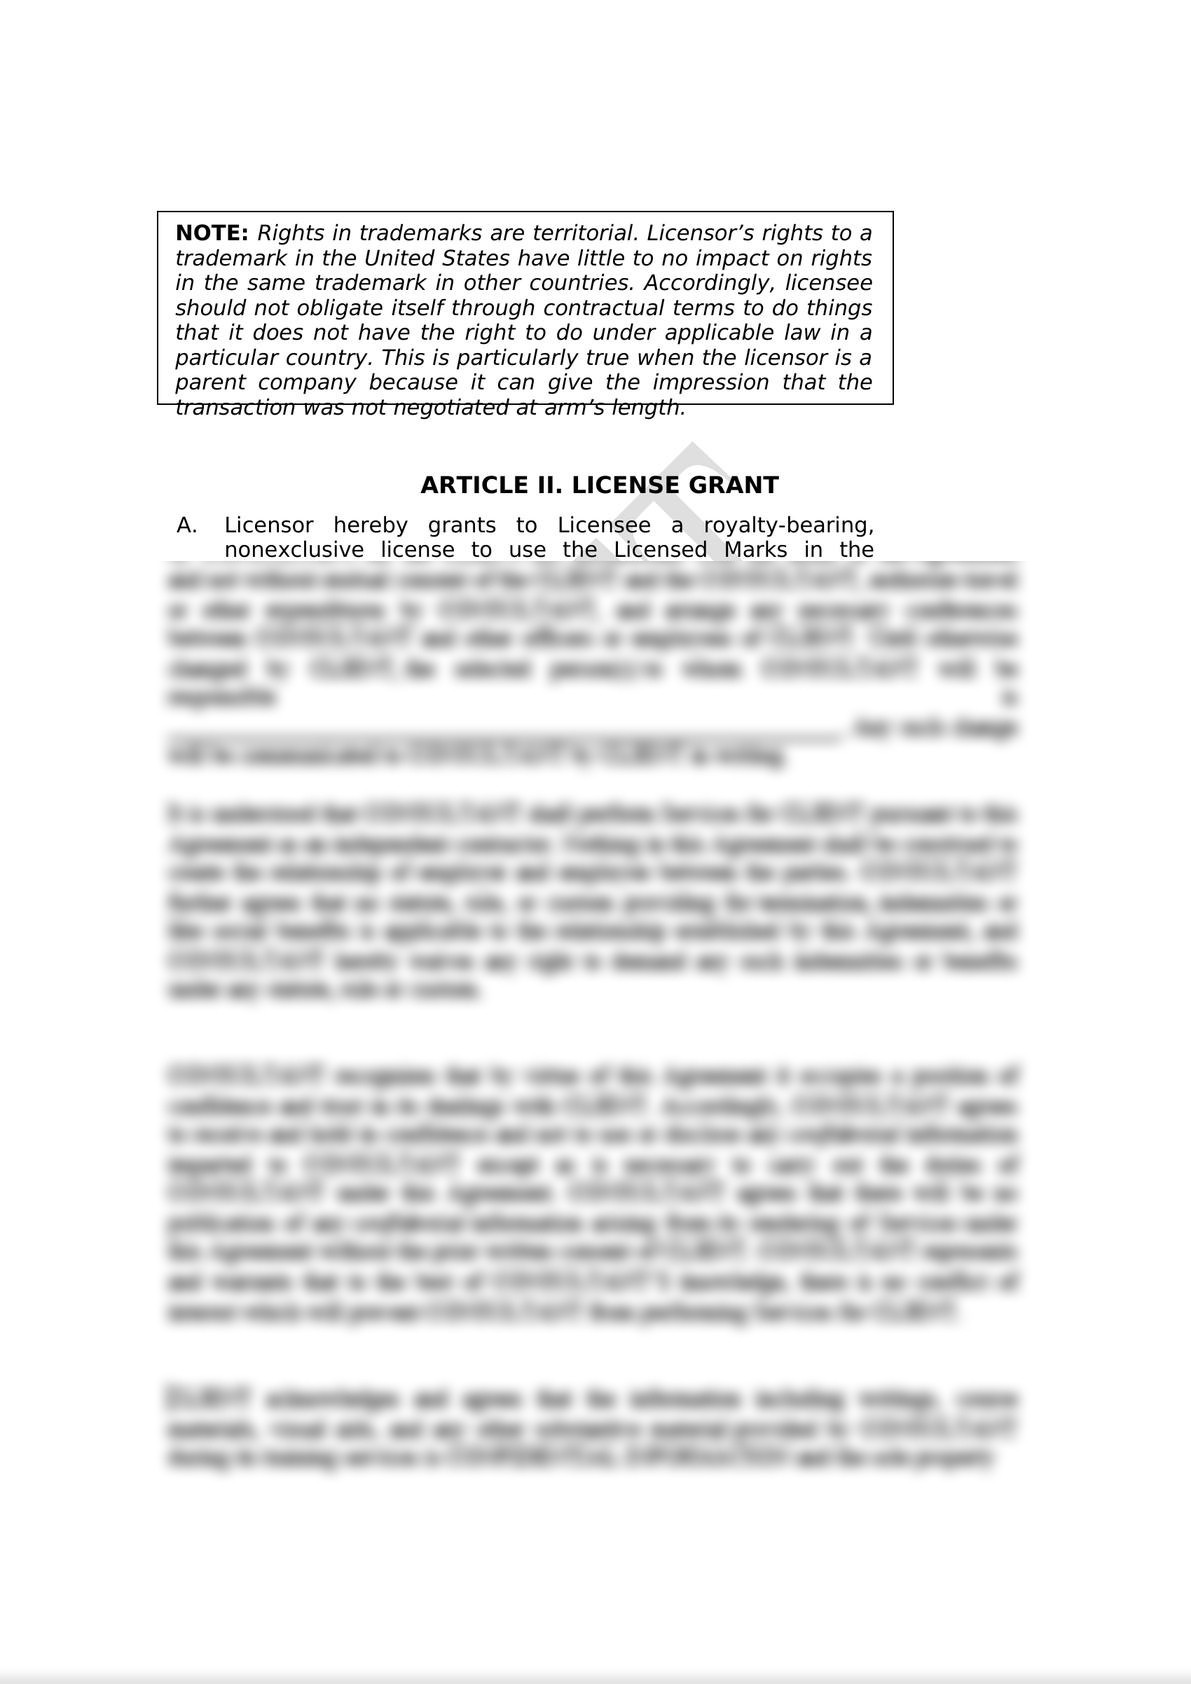 Inter-Company Intellectual Property Licensing Agreement-2